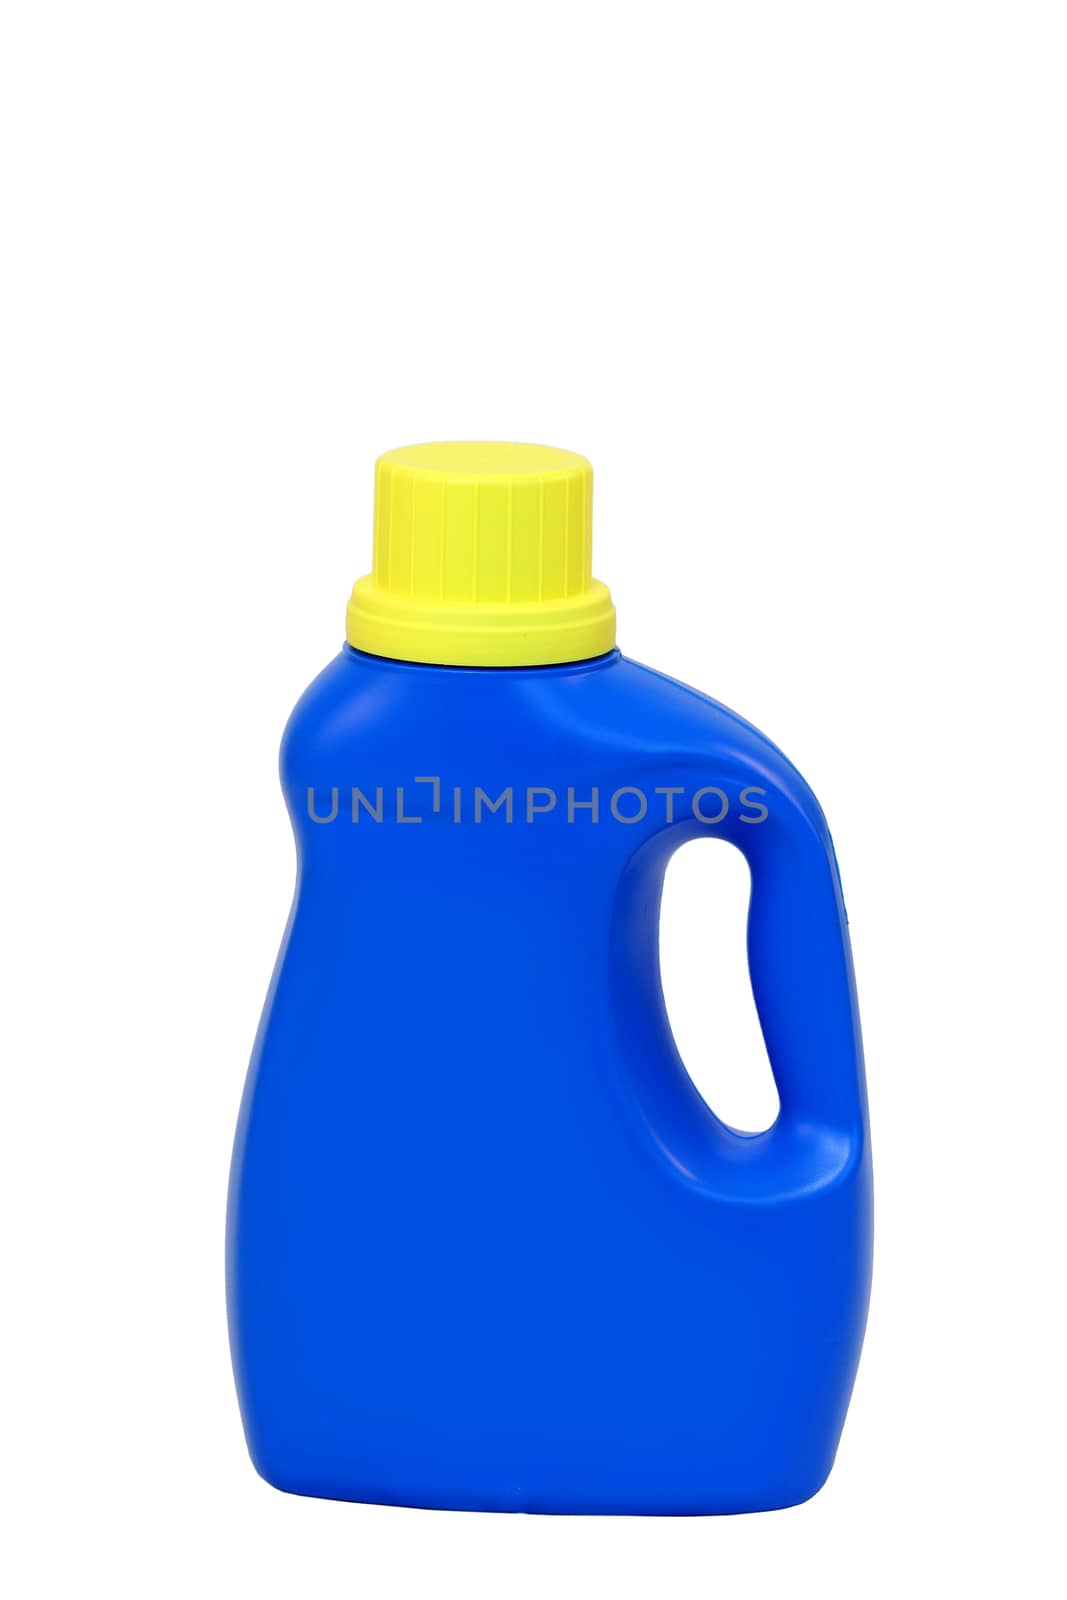 a isolated Laundry detergent bottle